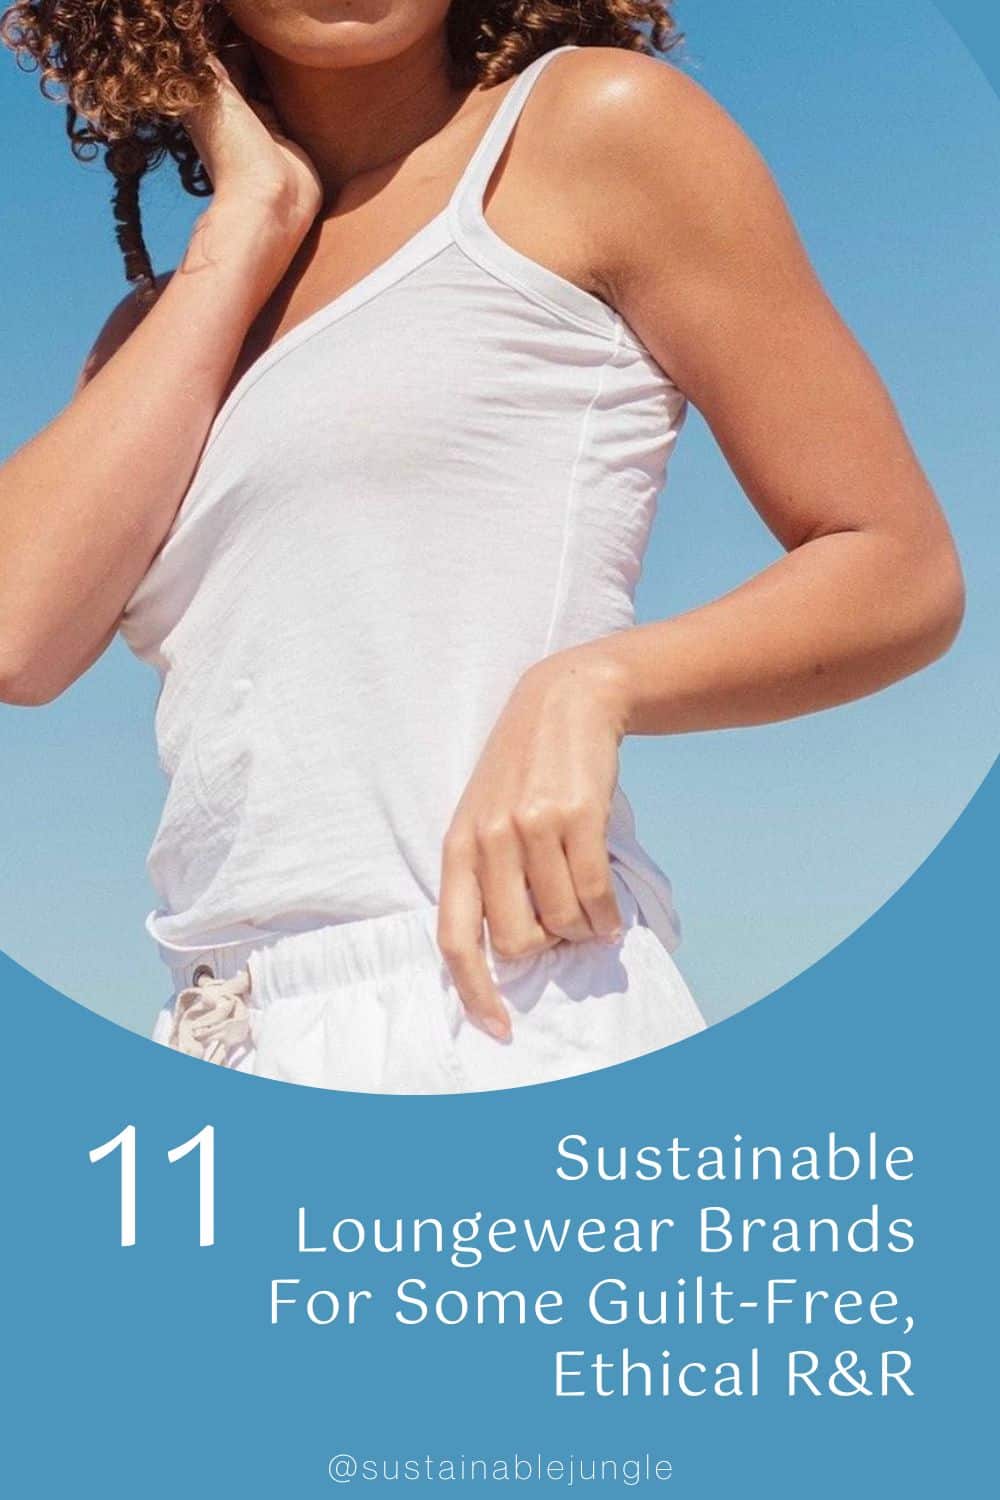 11 Sustainable Loungewear Brands For Some Guilt-Free, Ethical R&R Image by YesAnd #sustainableloungewear #sustainableloungewearbrands #affordablesustainableloungewear #ethicalloungewear #ethicalloungewearsets #sustainableethicalloungewear #sustainablejungle